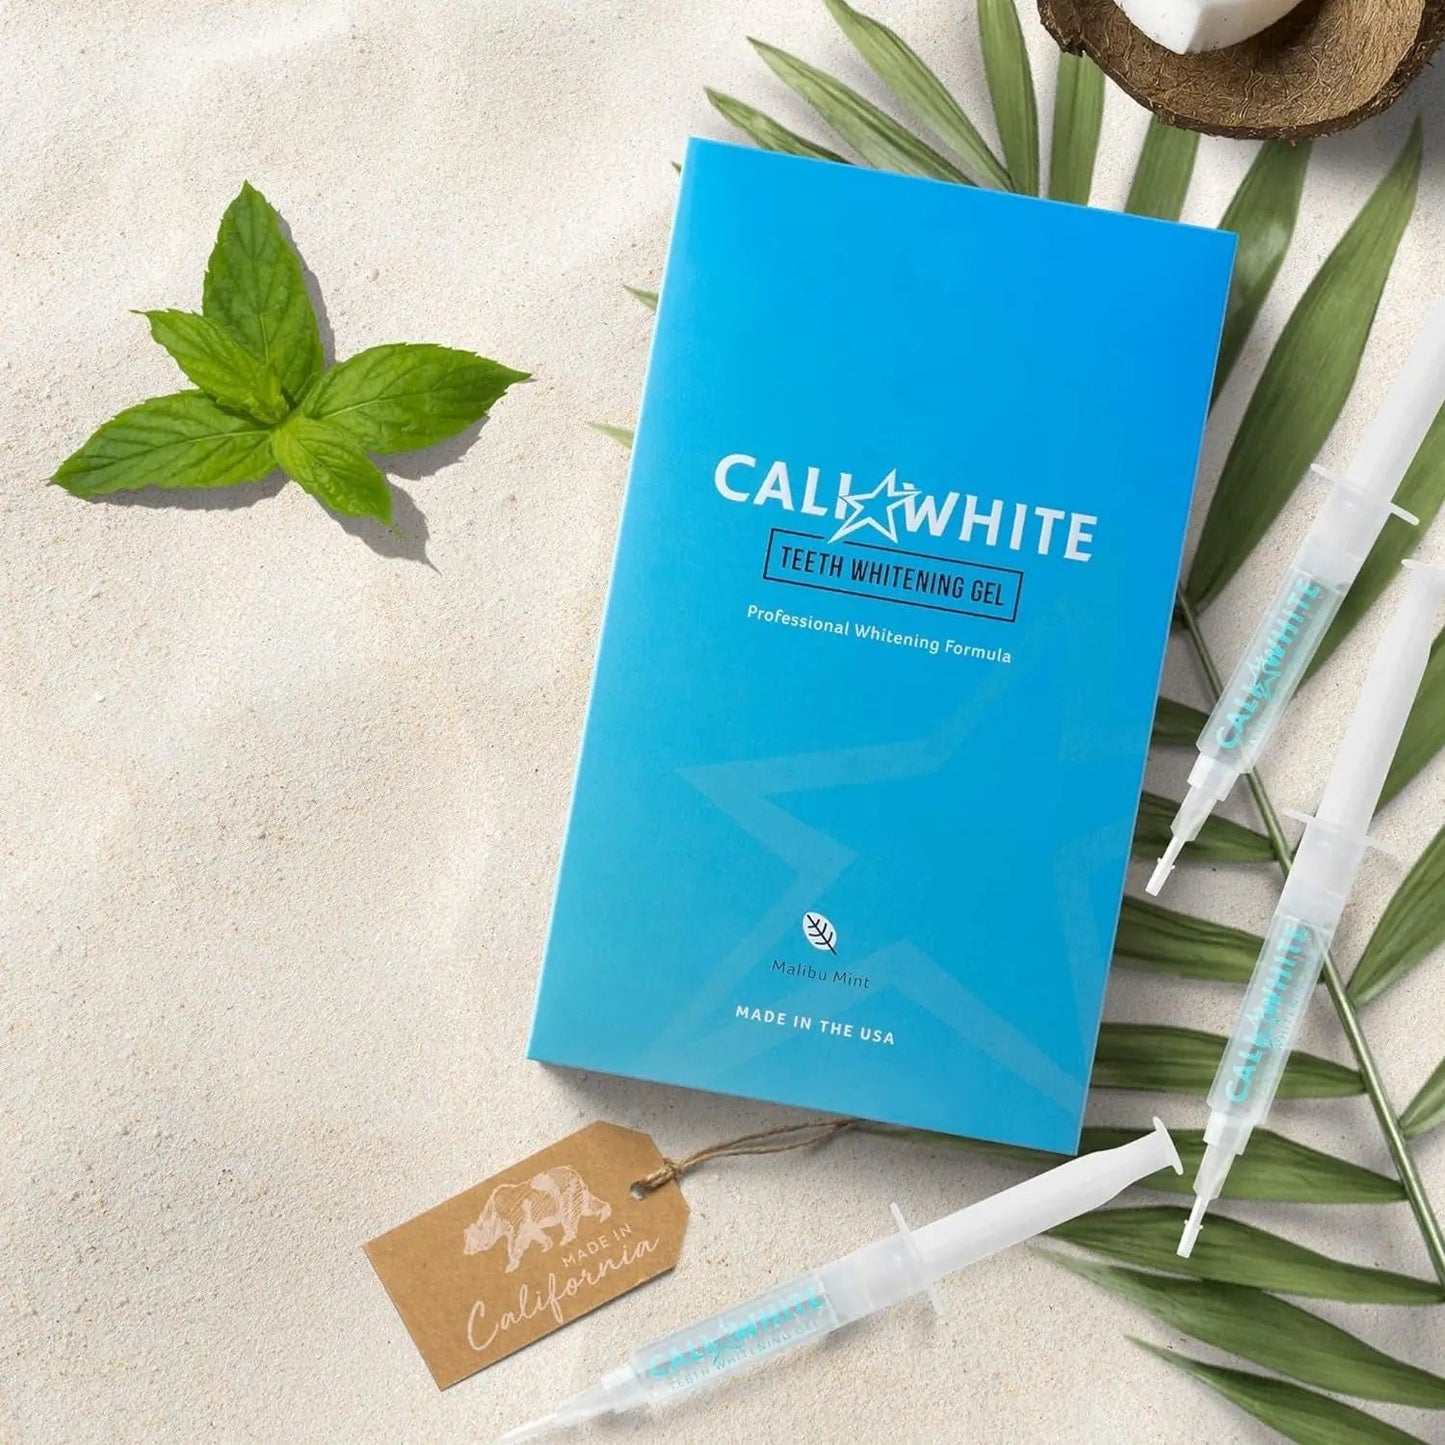 Cali White Teeth Whitening Kit Gel Refills, 35% Carbamide Peroxide, Natural, Vegan, Organic Whitener for Sensitive Tooth Bleach, Gels Made in USA, 3X 5Ml Syringes, Use with UV or LED Light & Trays